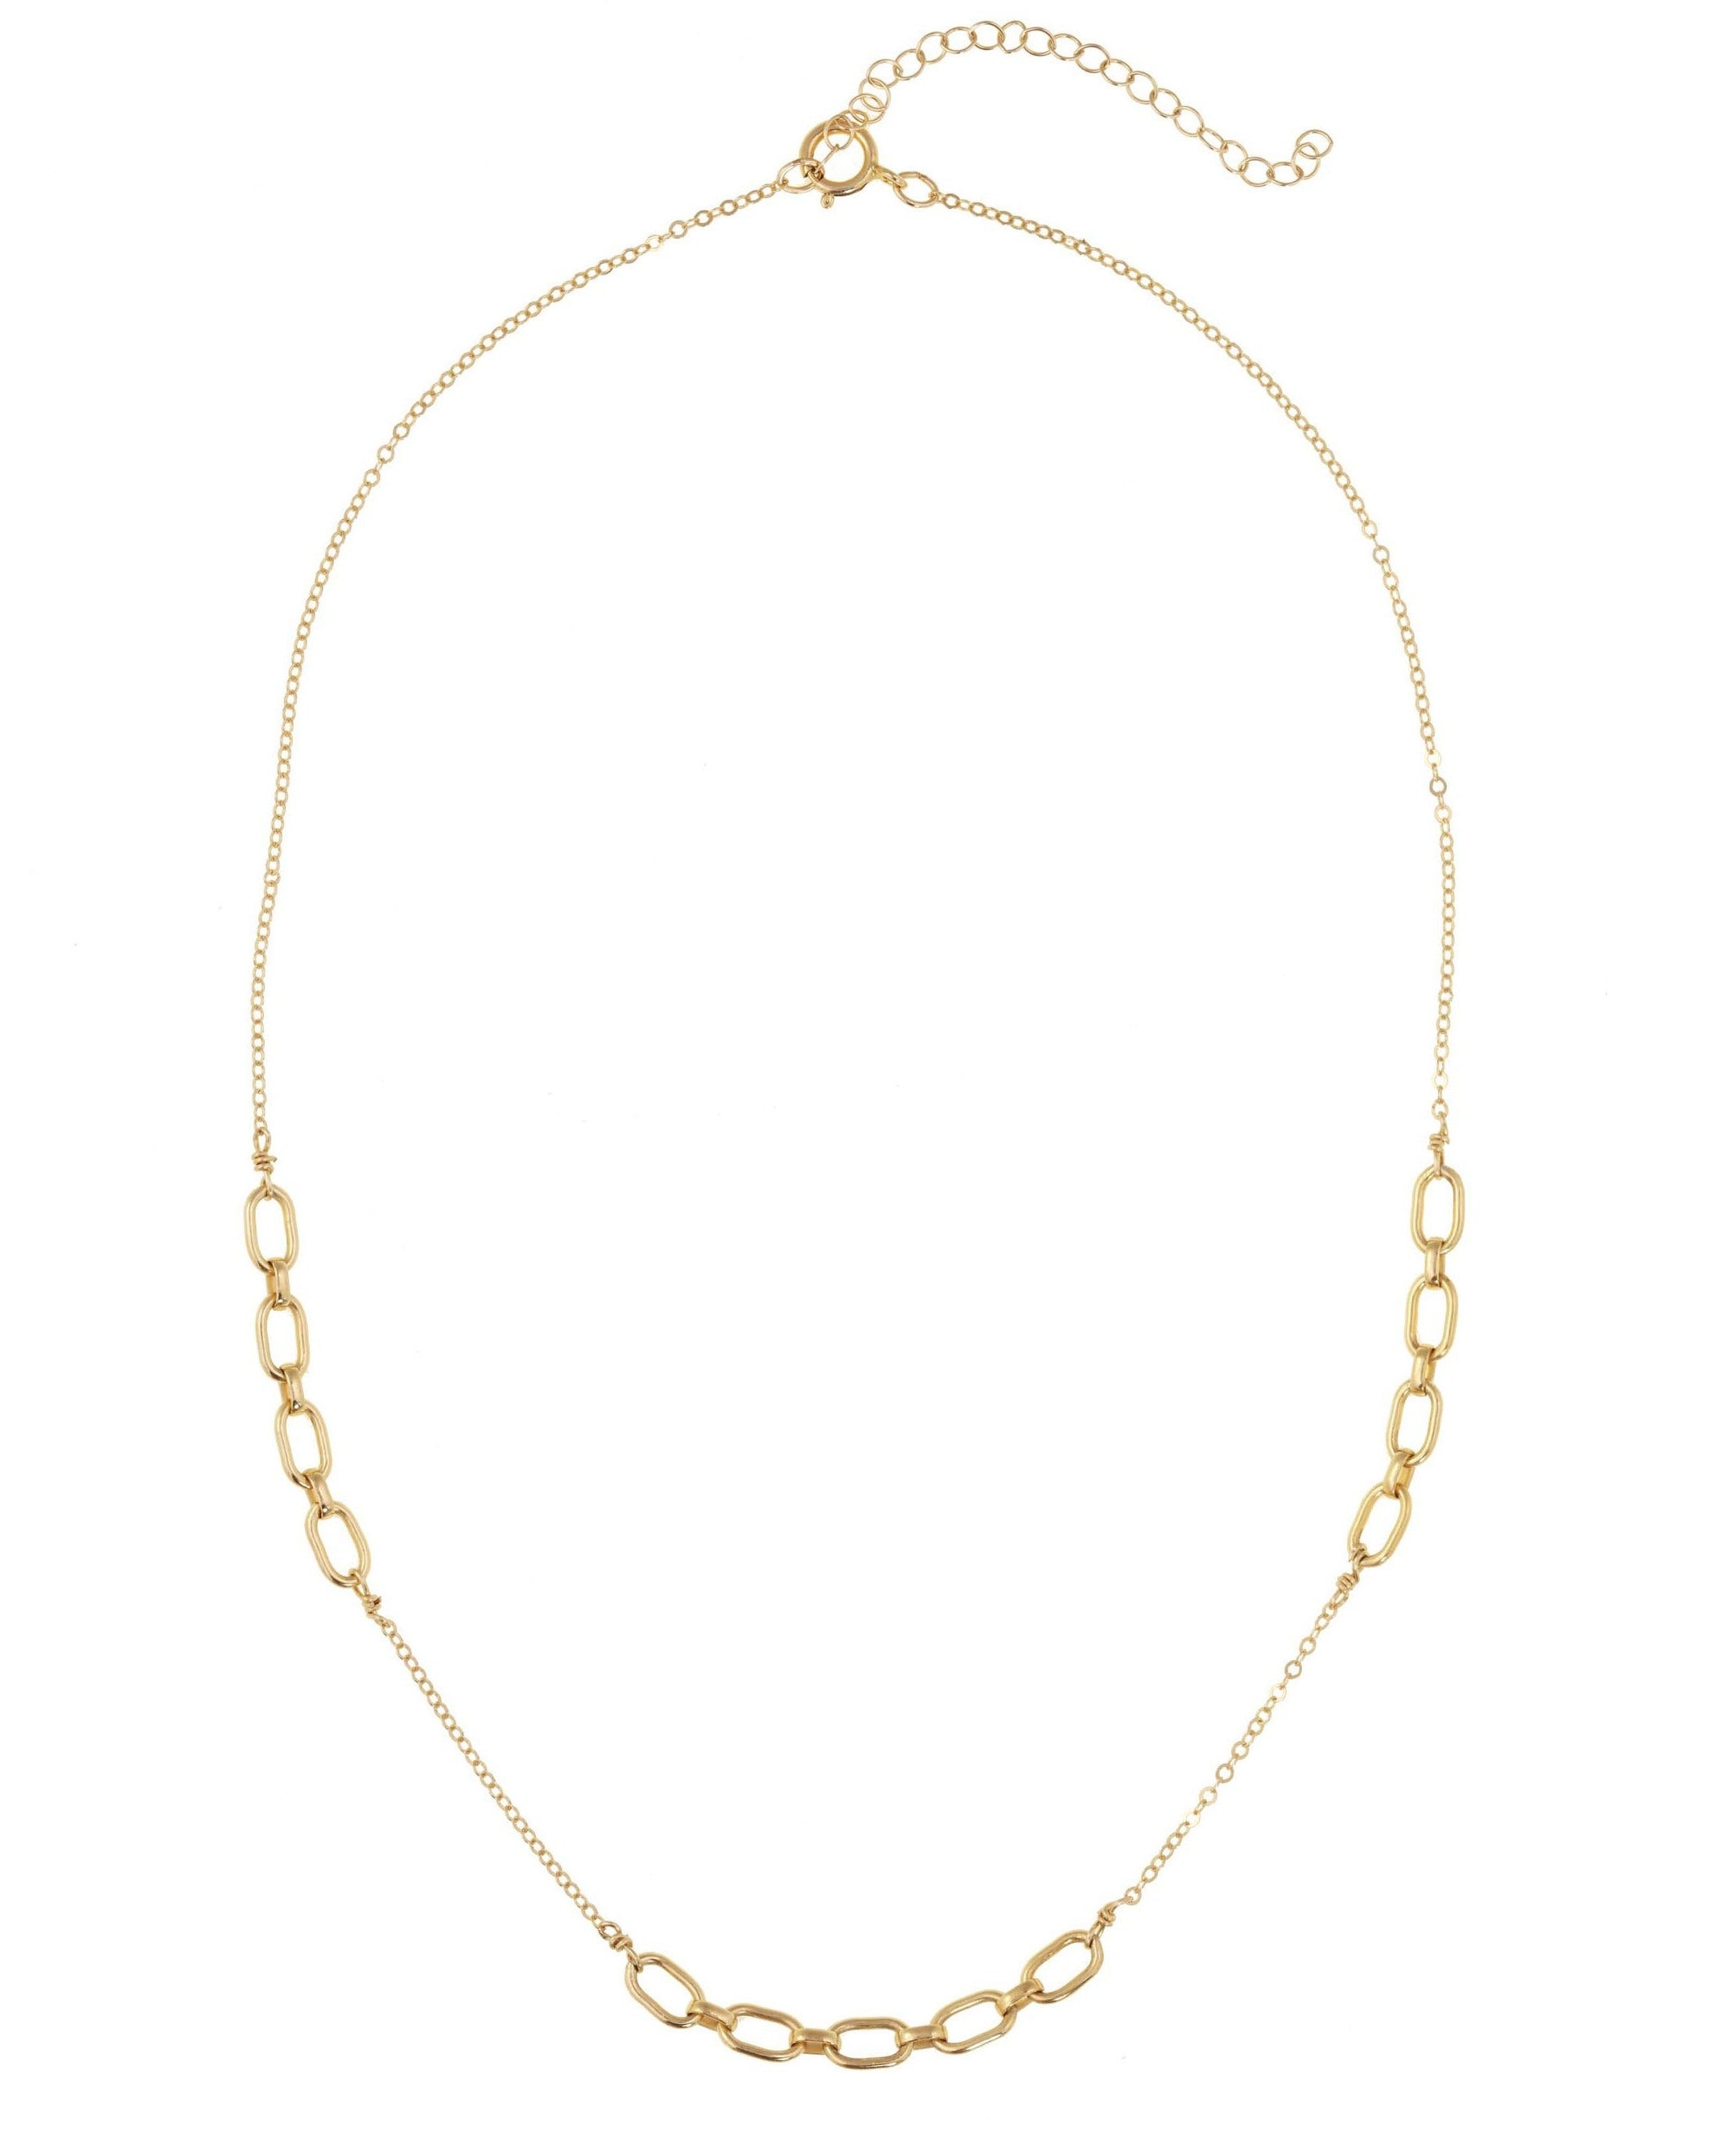 Yvonne Necklace by KOZAKH. A 14 to 16 inch adjustable length necklace, crafted in 14K Gold Filled, featuring flat link chain design.